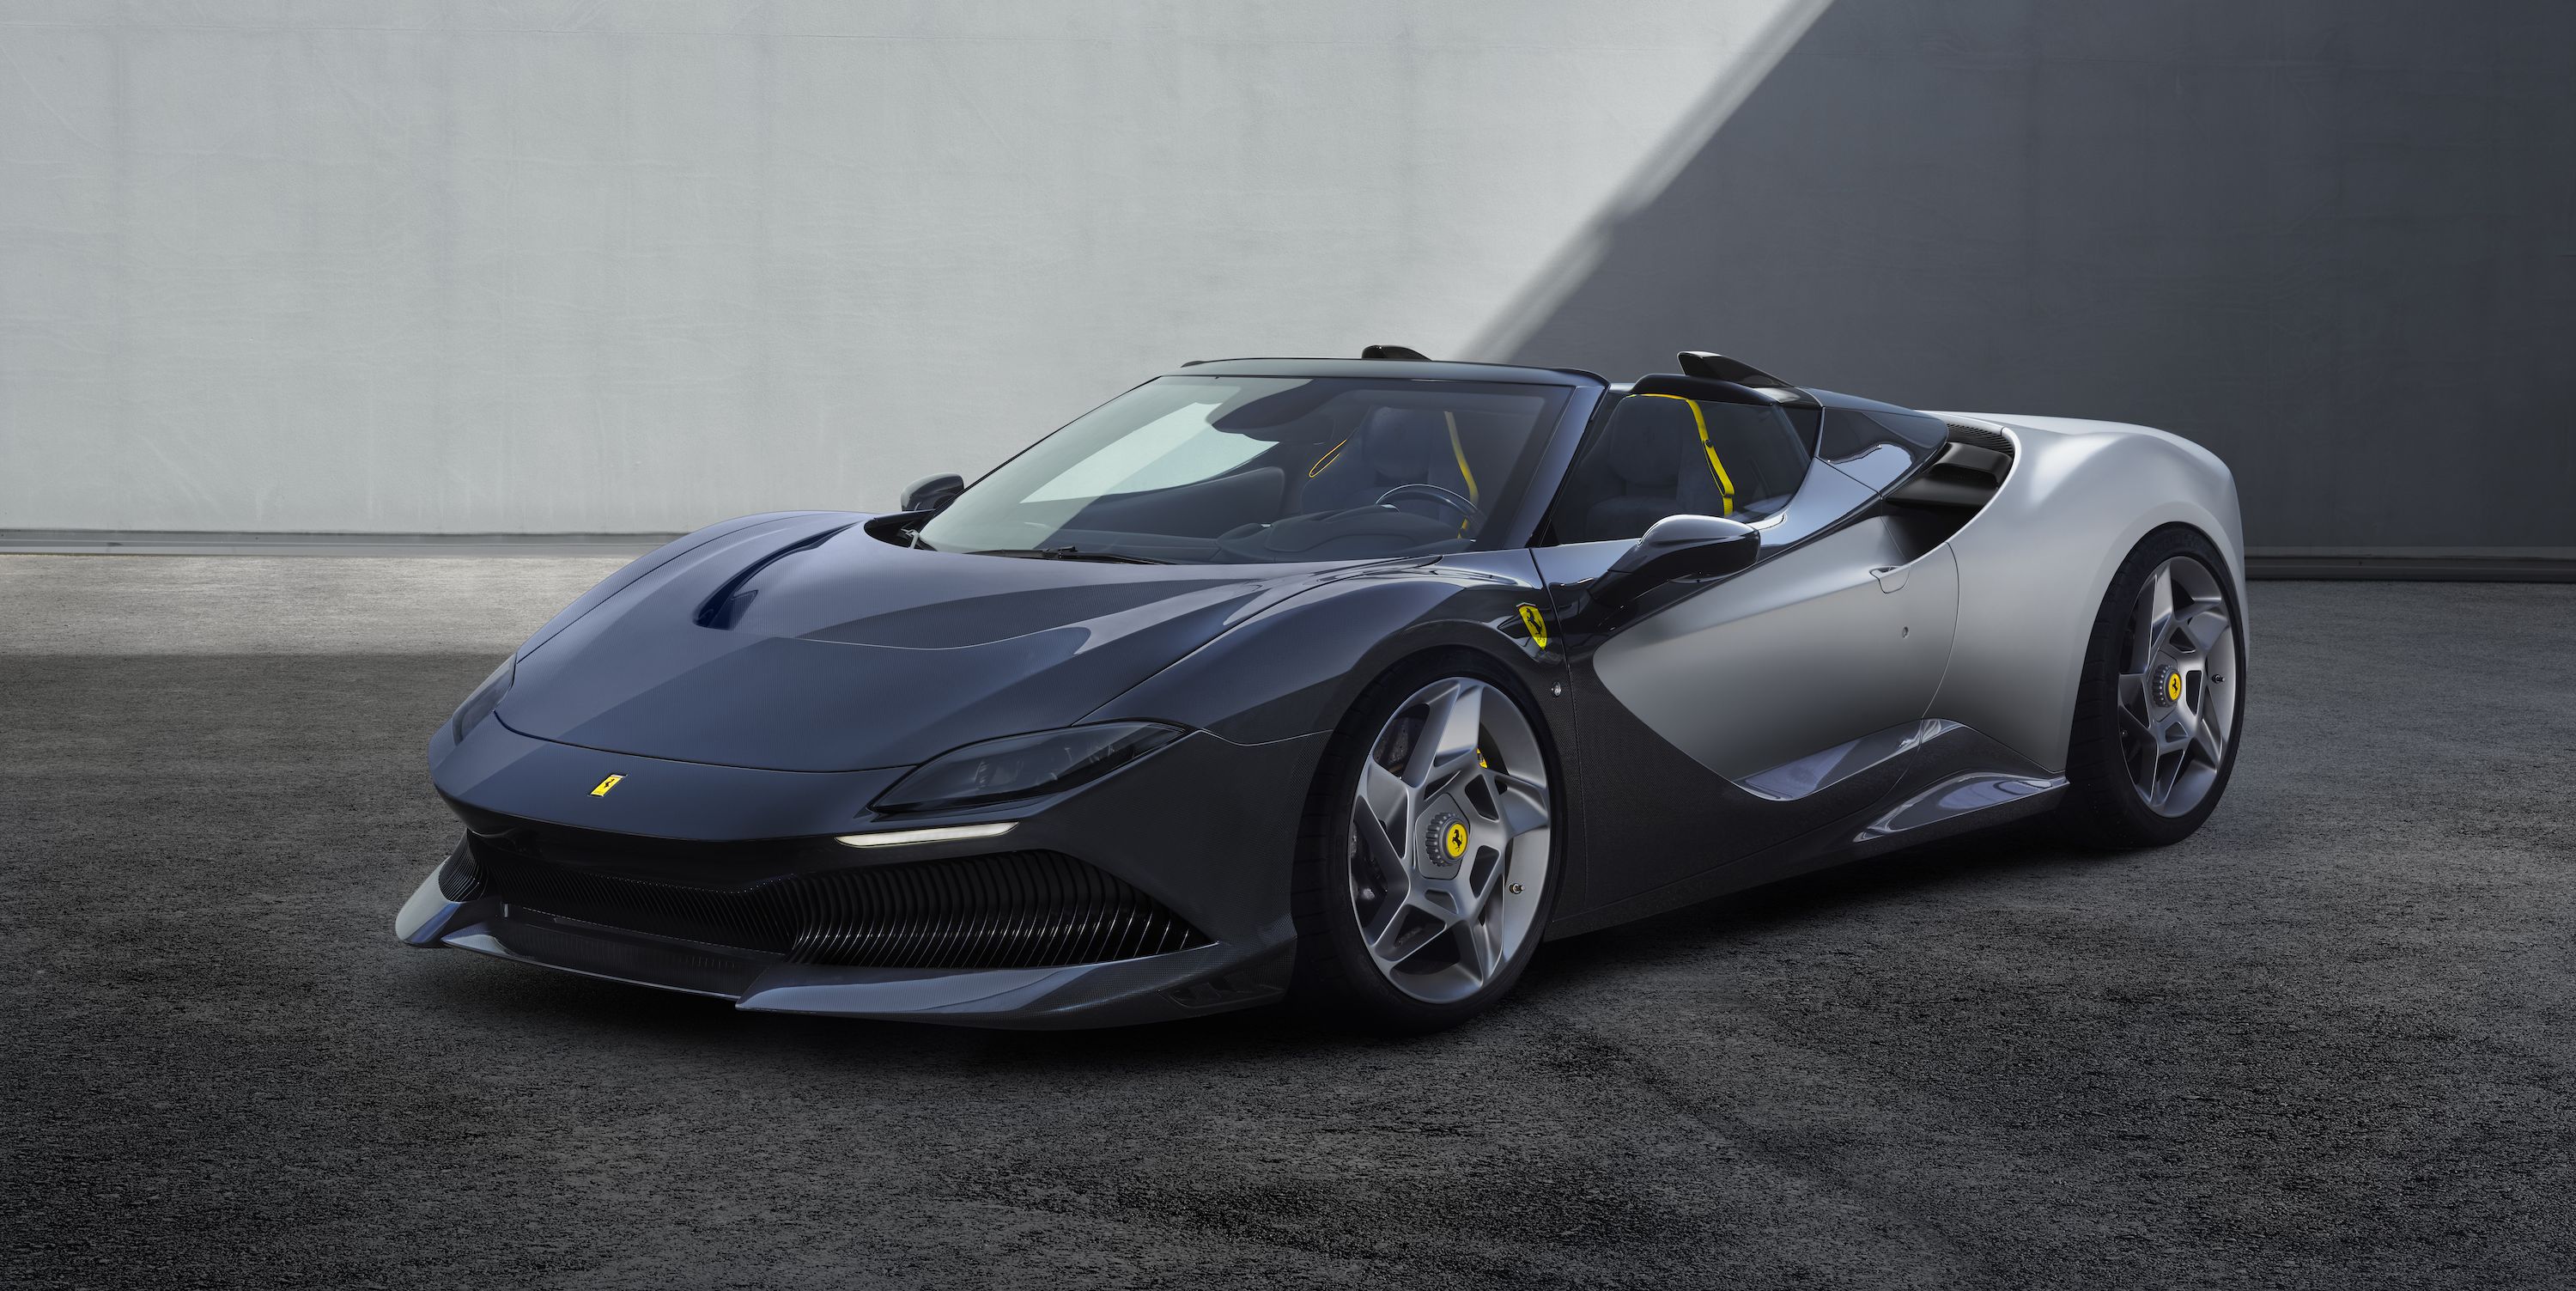 The Ferrari SP-8 Is a Genuine One-Off Roadster